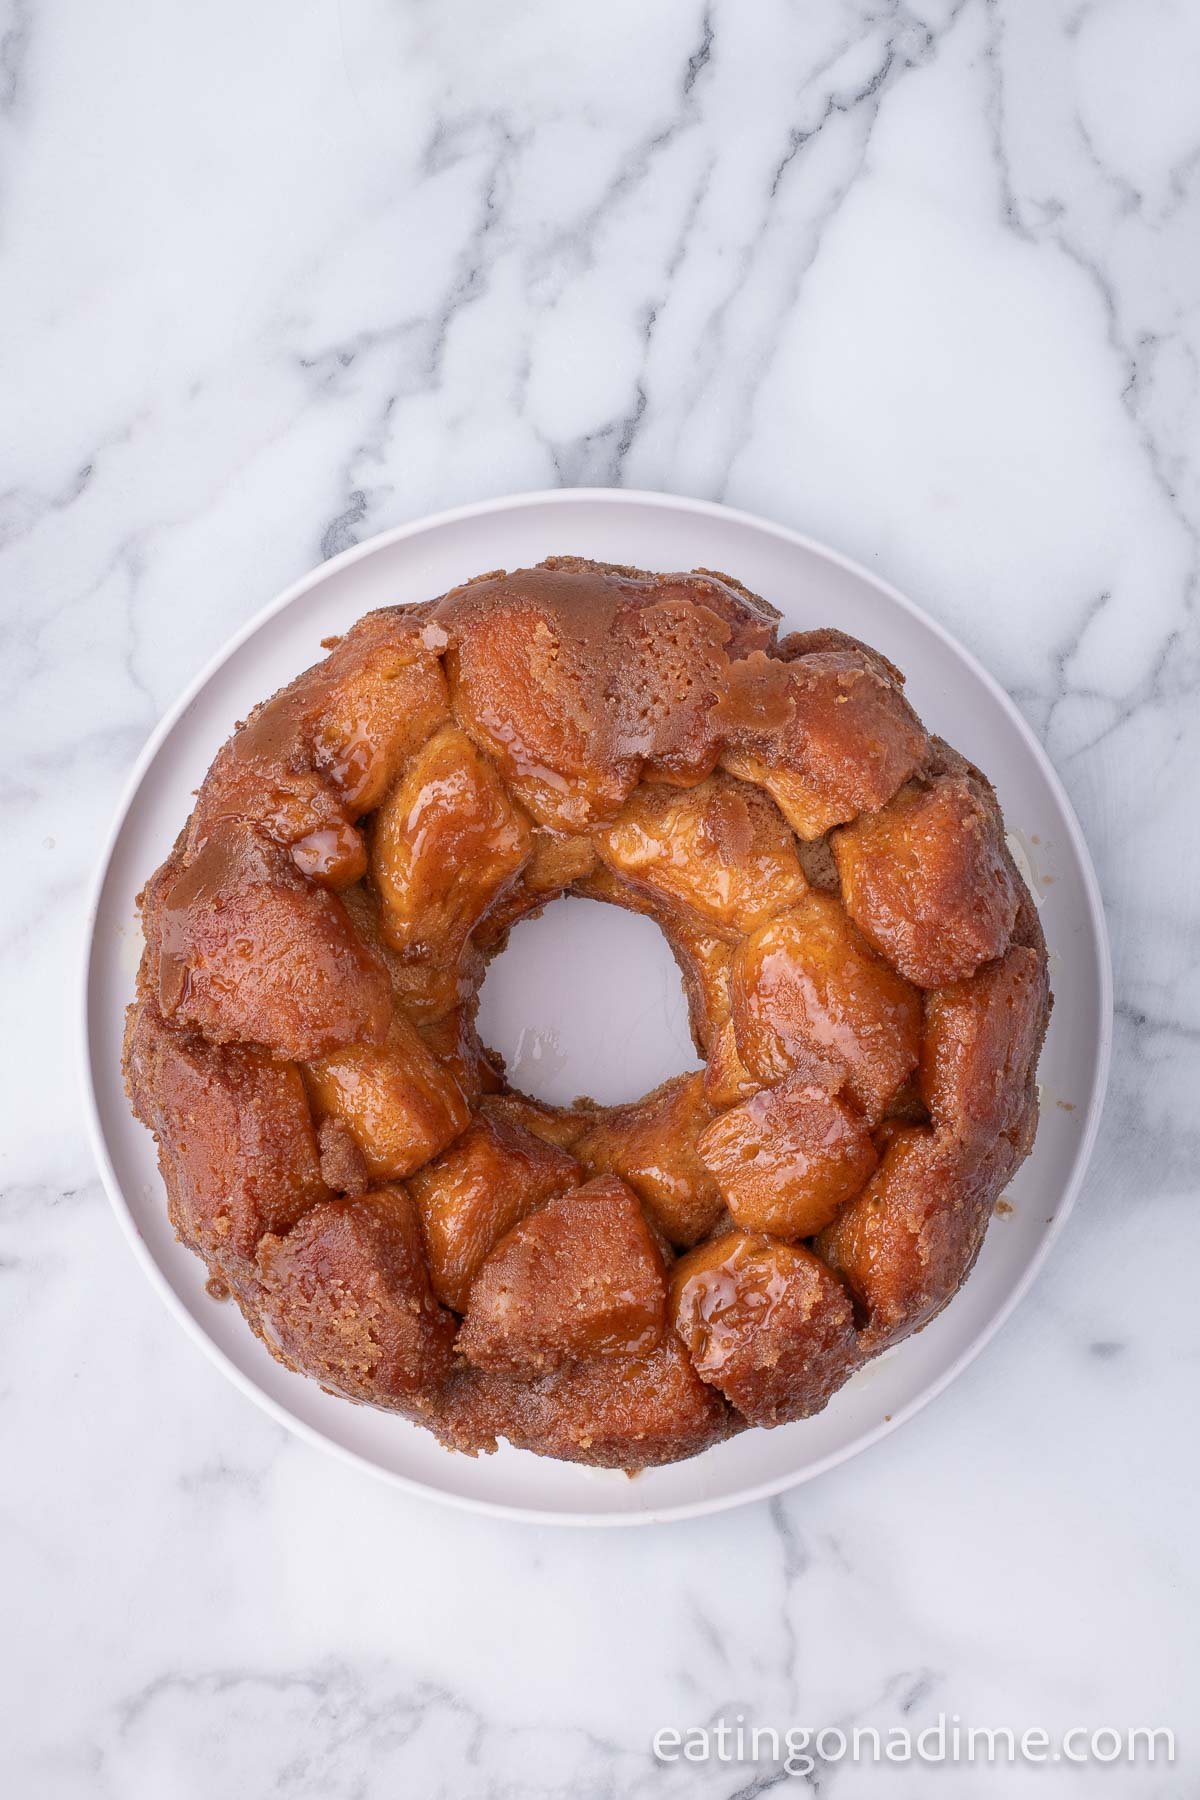 The monkey bread fully cooked and carefully inverted onto a serving plate.  